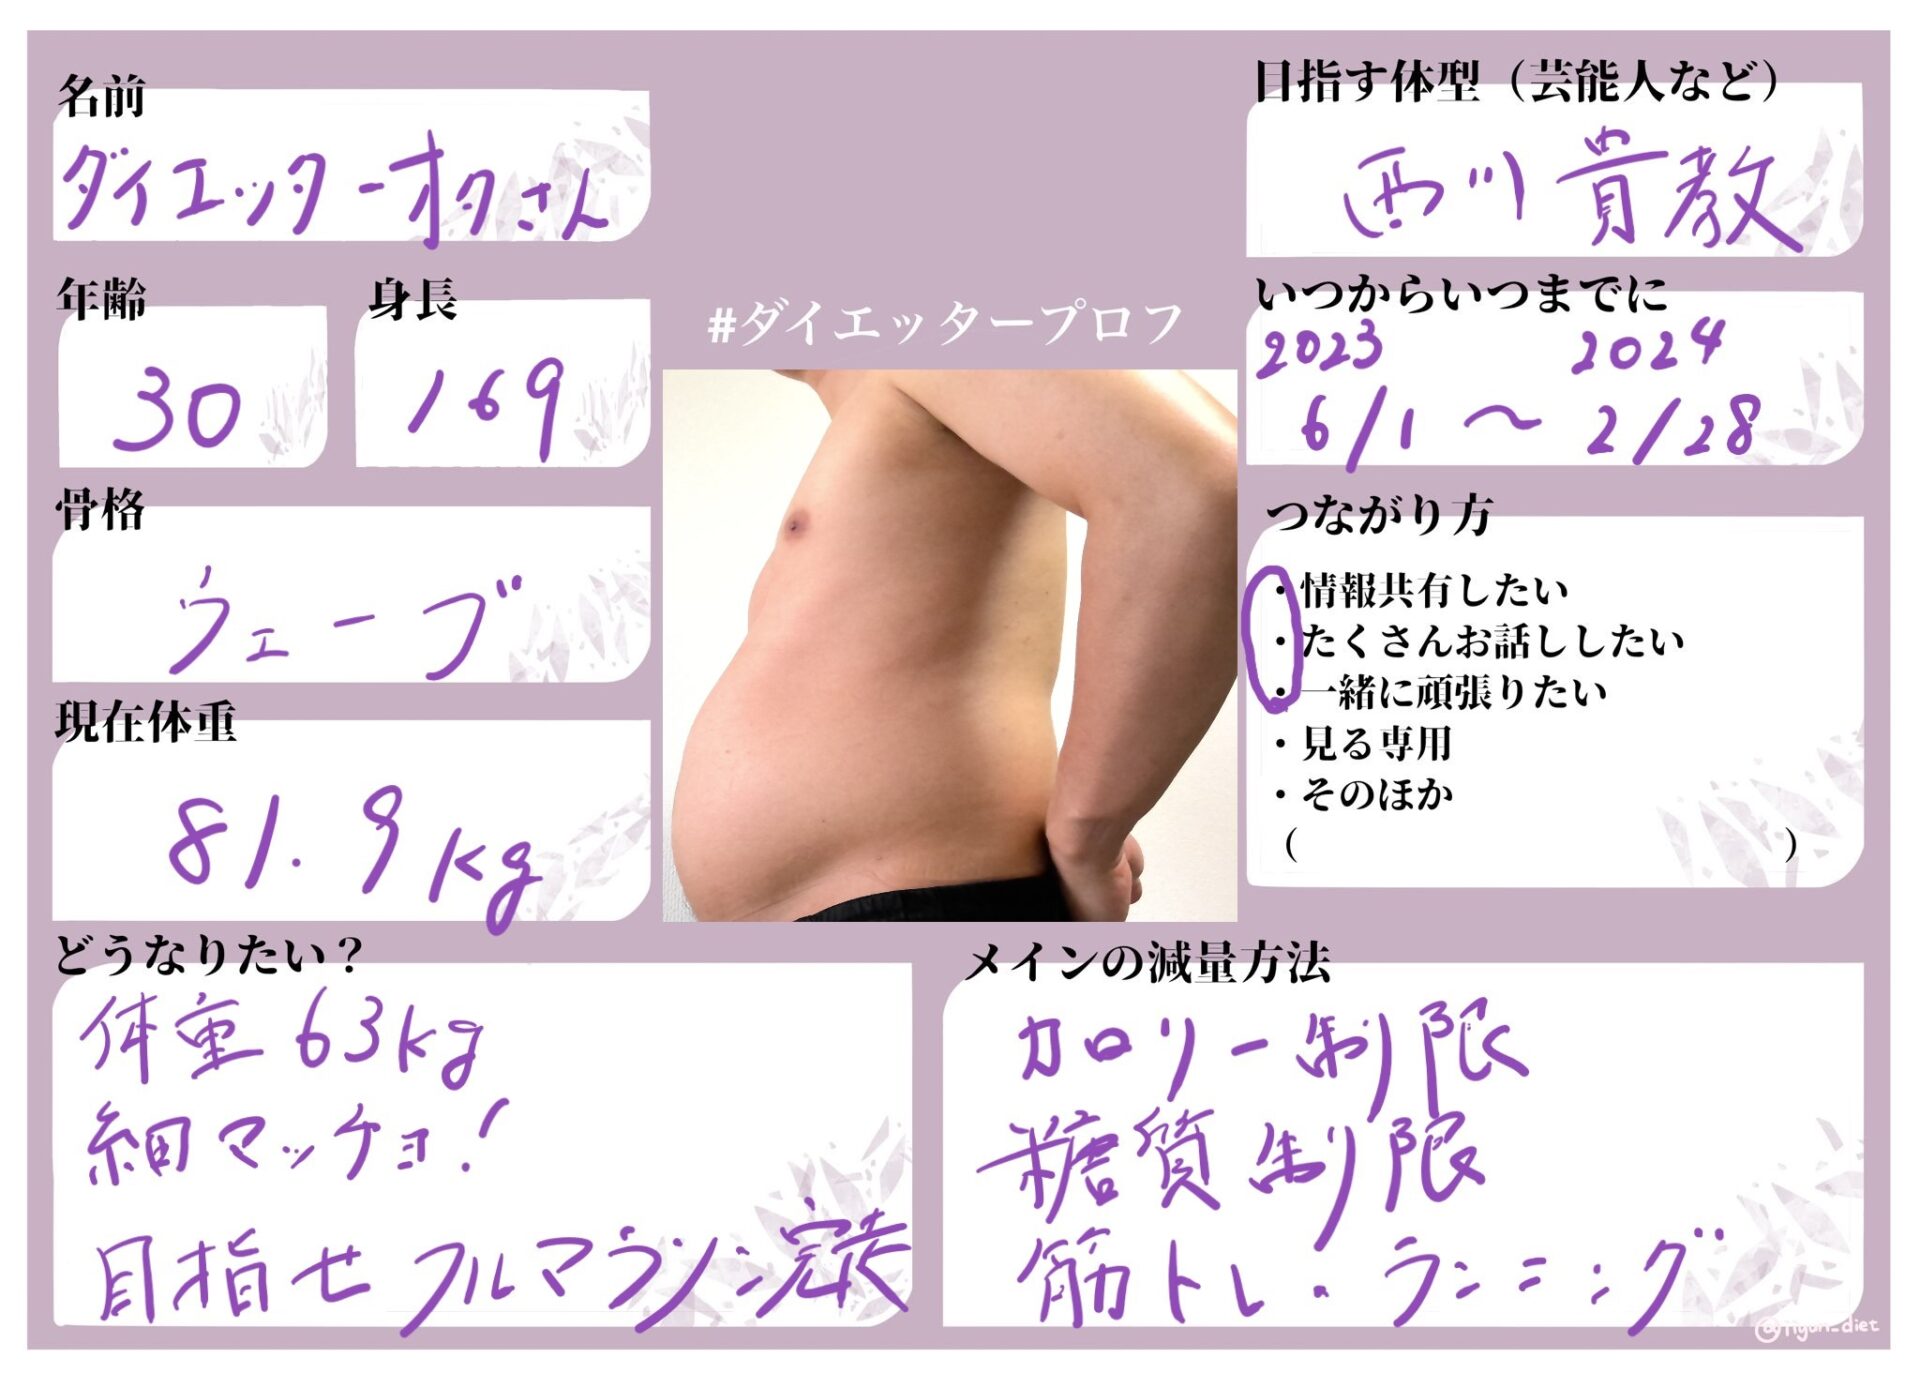 FnSvKyIaMAA4mpf 本気ダイエット開始！<br>　ダイエット日記-Day１　ー2023/６/1ー